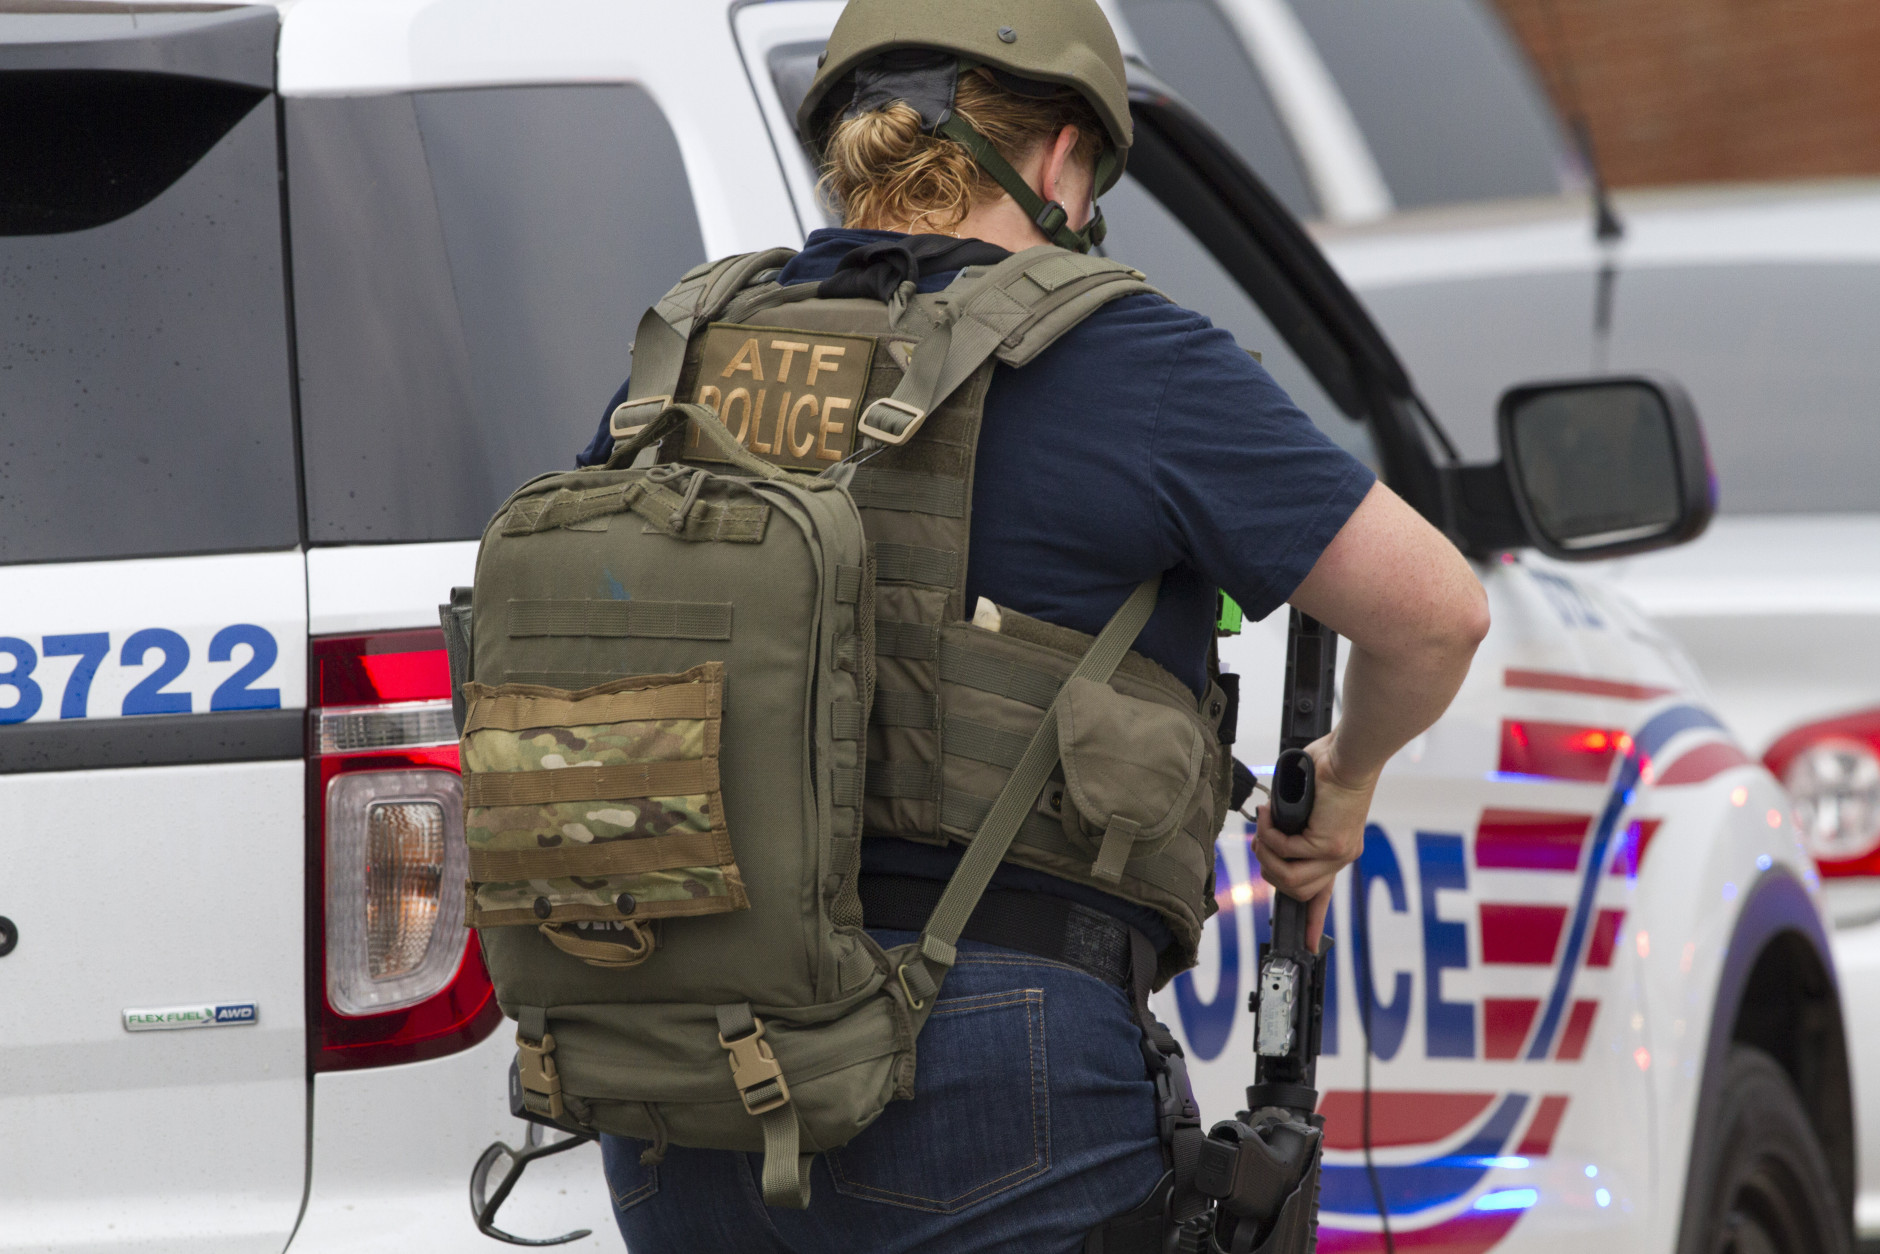 An ATF (Bureau of Alcohol, Tobacco, Firearms and Explosives) police officer walks toward the Navy Yard in Washington, Thursday, July 2, 2015. The Washington Navy Yard was on lockdown Thursday morning after reports of gunshots, but a senior federal law enforcement official says there has been no confirmed report of any shooting.   (AP Photo/Jacquelyn Martin)